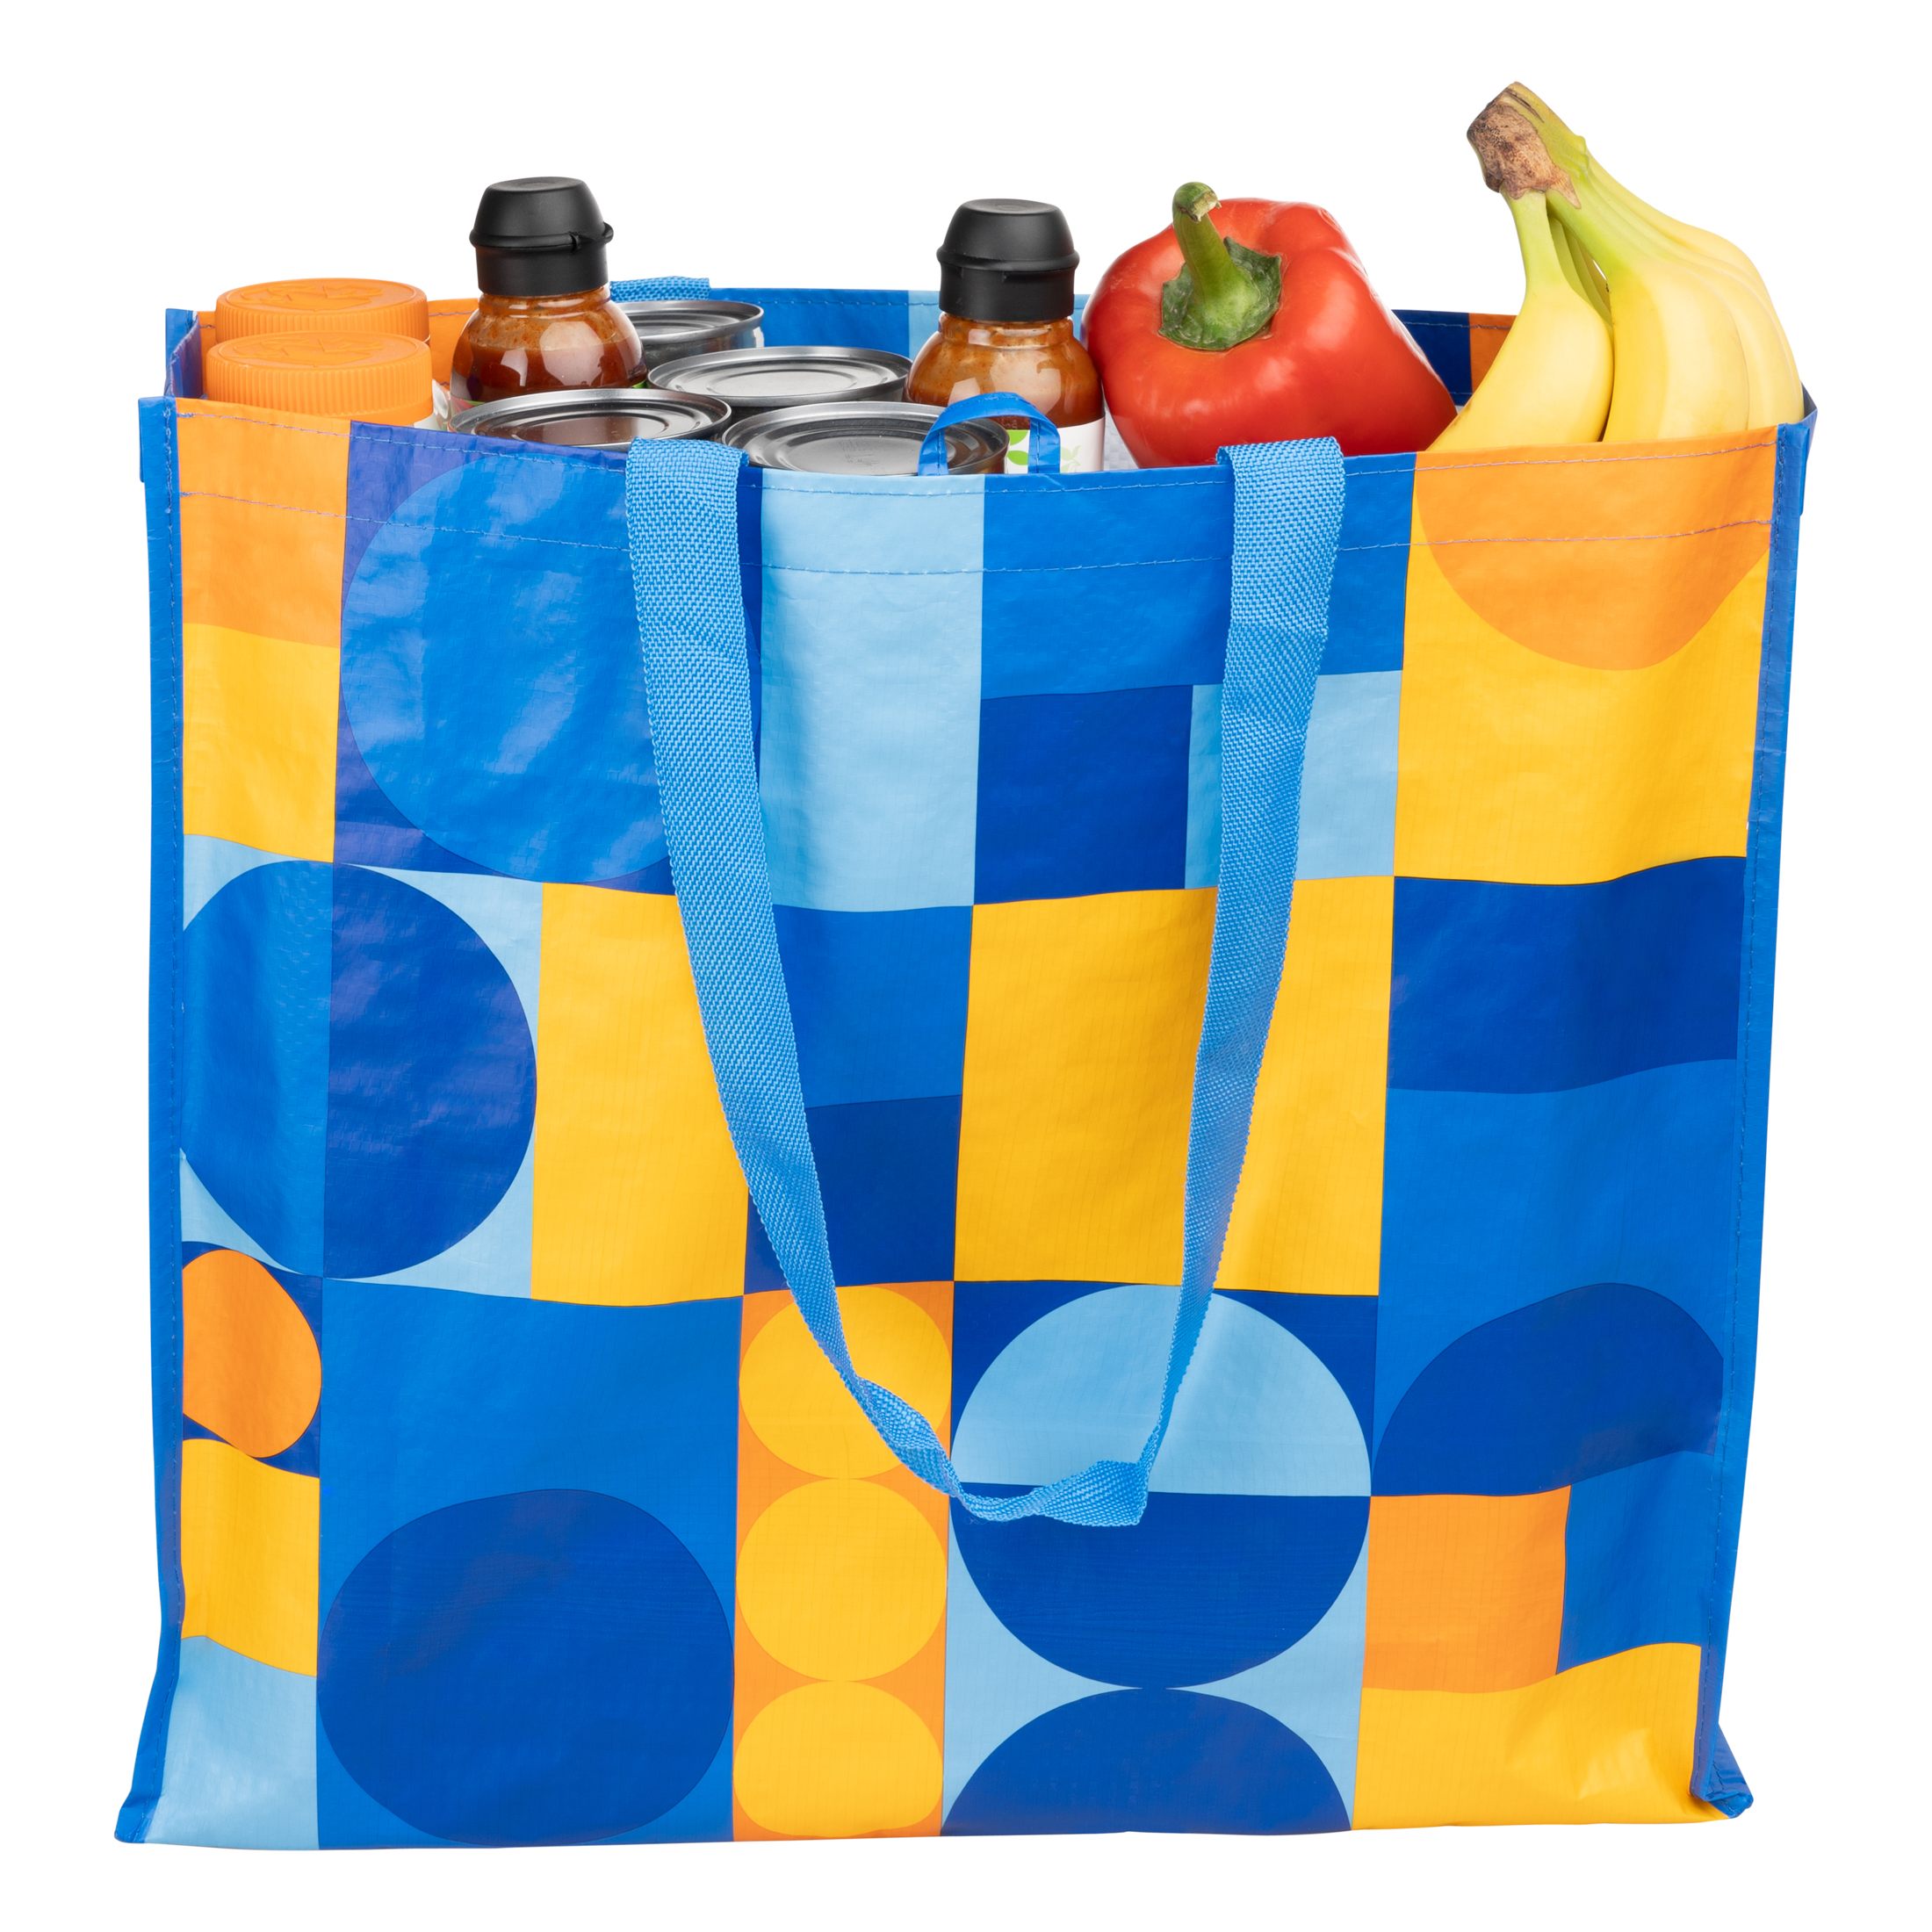 Reusable, Multi-Functional Wide Grocery Bag, Blue and Yellow Abstract Design - image 2 of 5